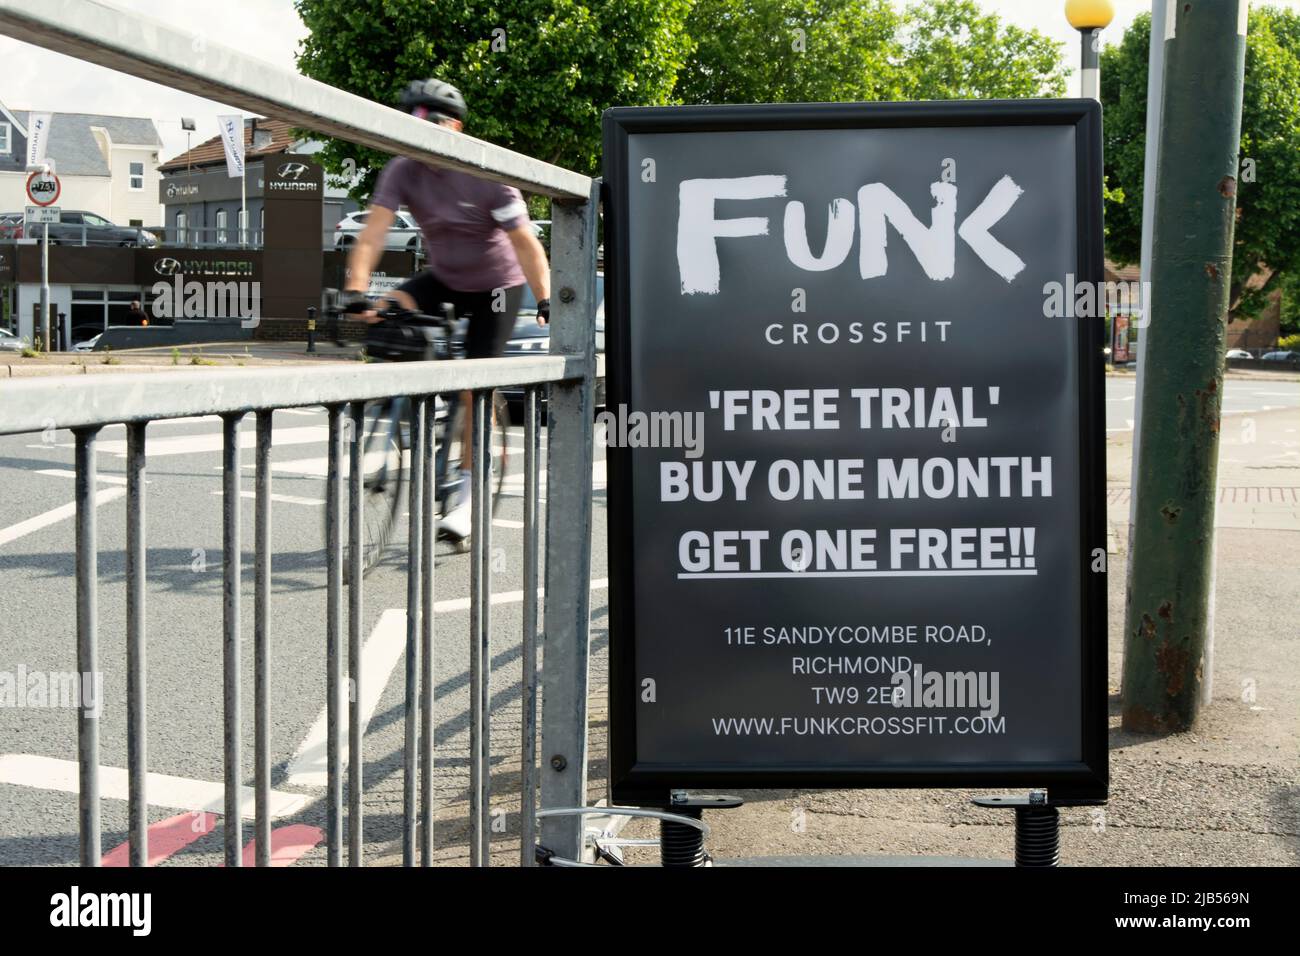 roadside advertising board for funk crossfit, a gym in richmond, soouthwest london, england, offering a free trail and one month free Stock Photo